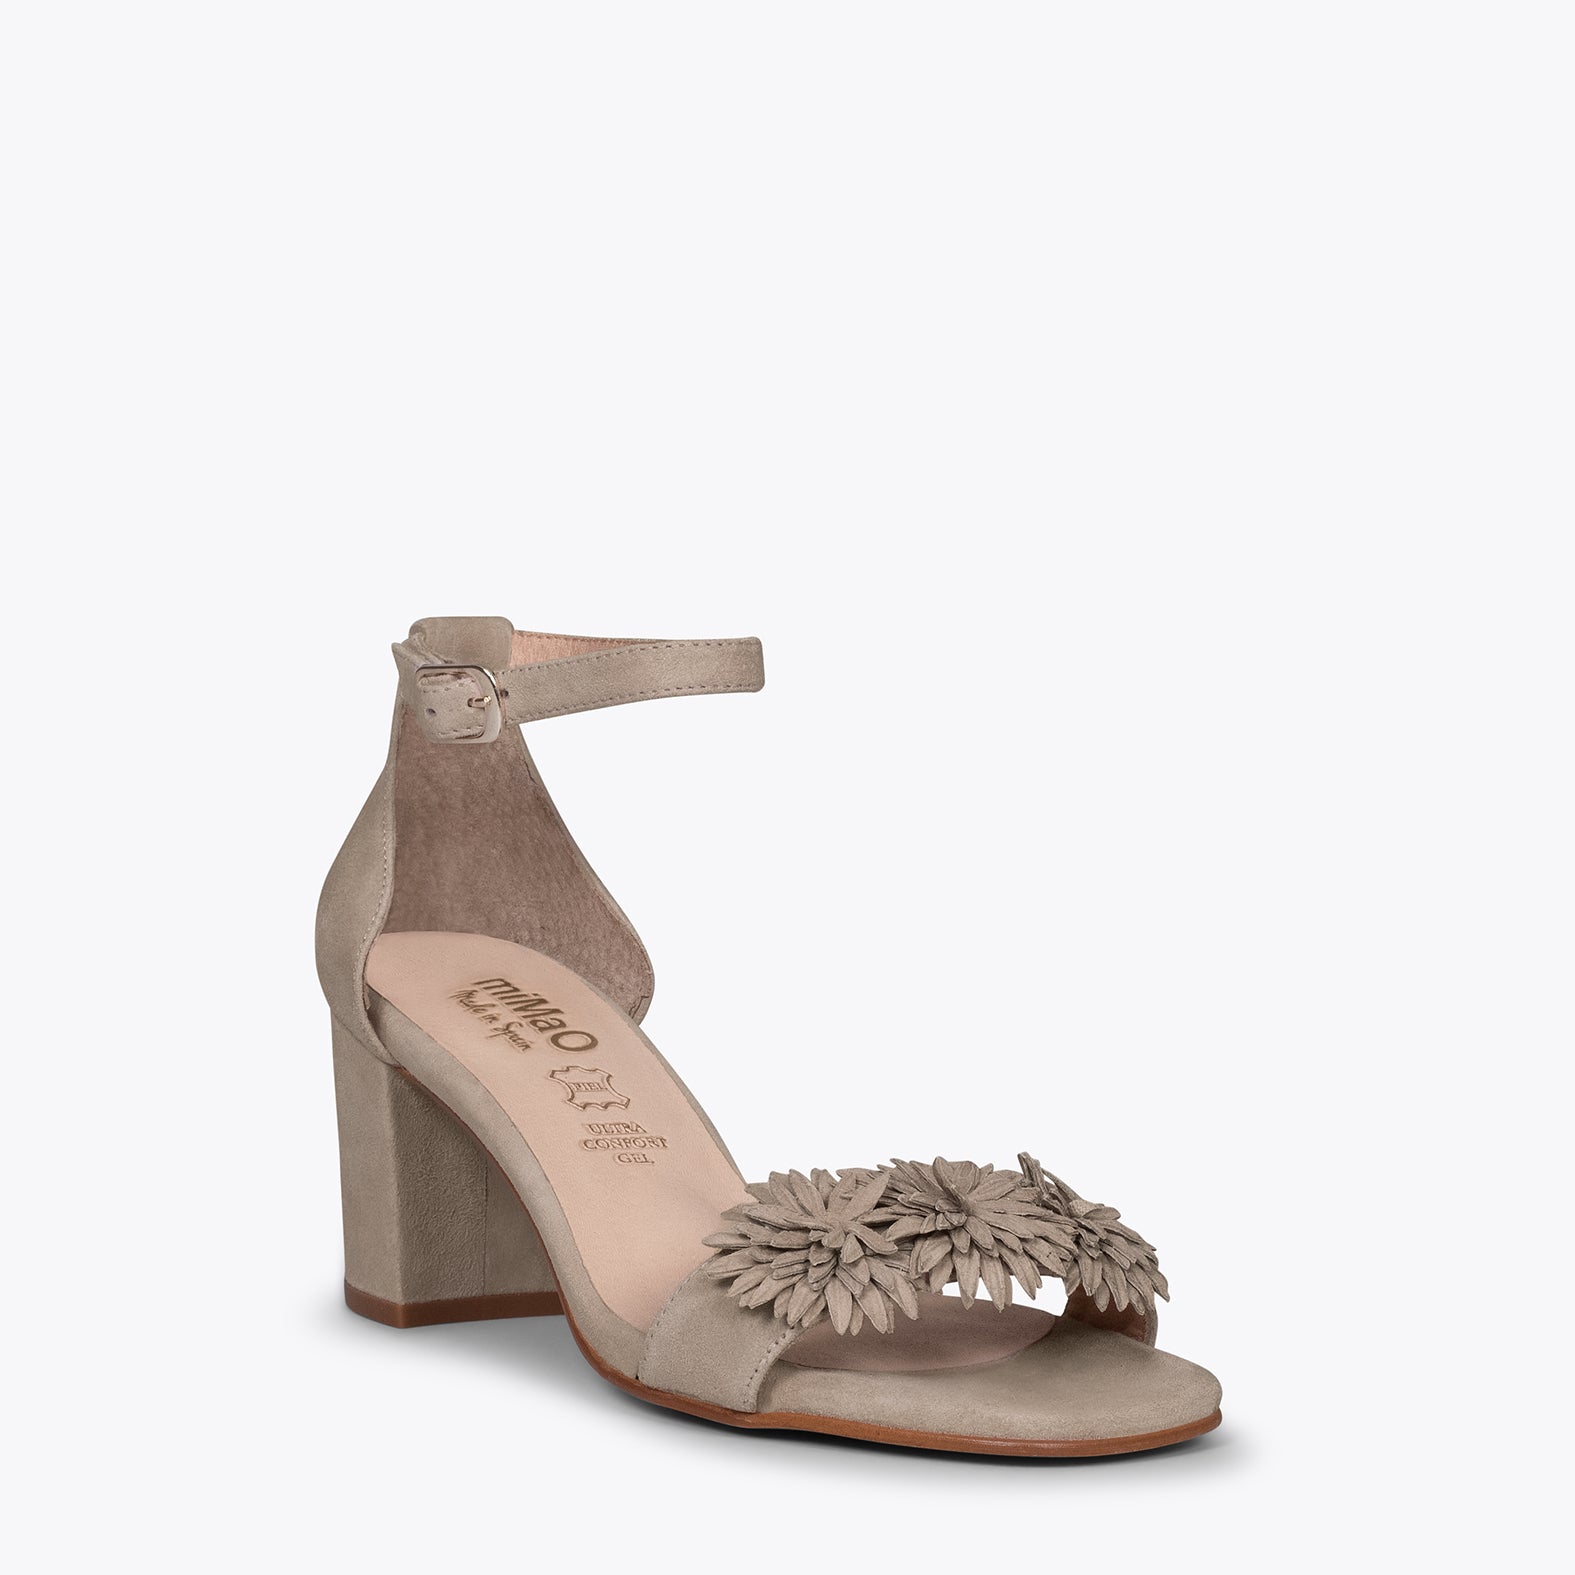 ZINNIA – TAUPE sandals with pompom details